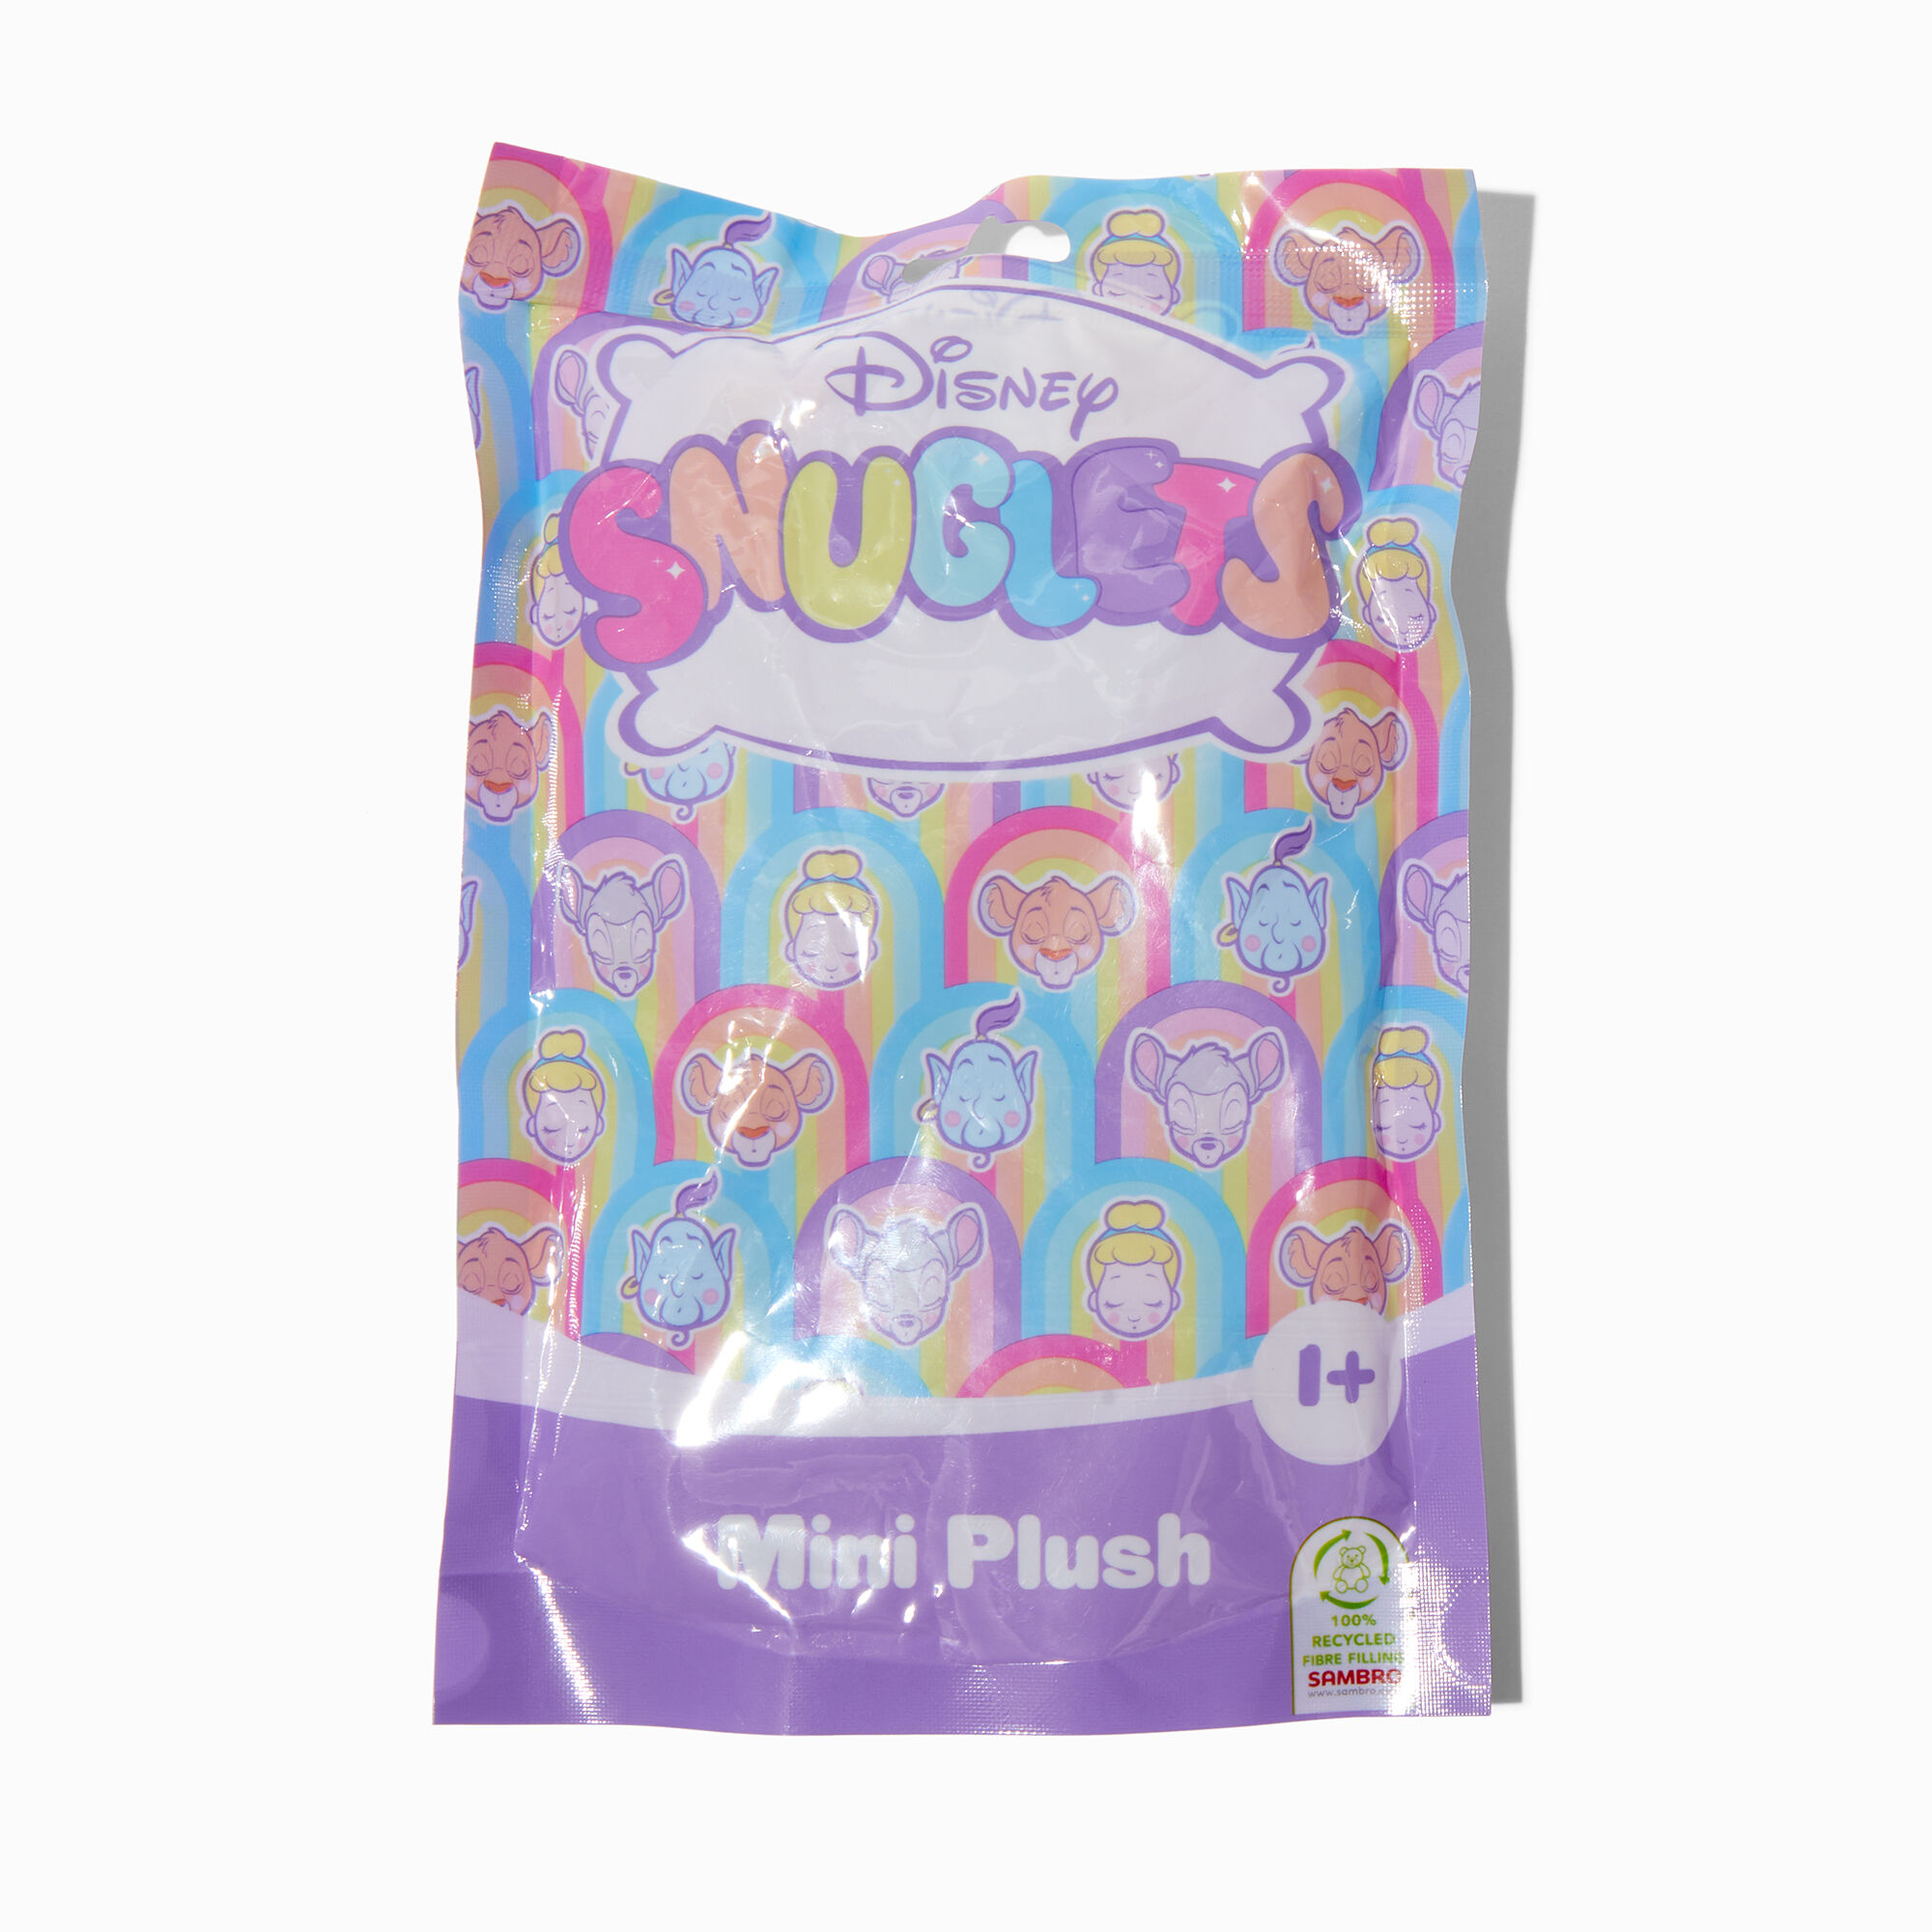 View Claires Disney Snuglets Mini Plush Blind Bag Styles Vary information